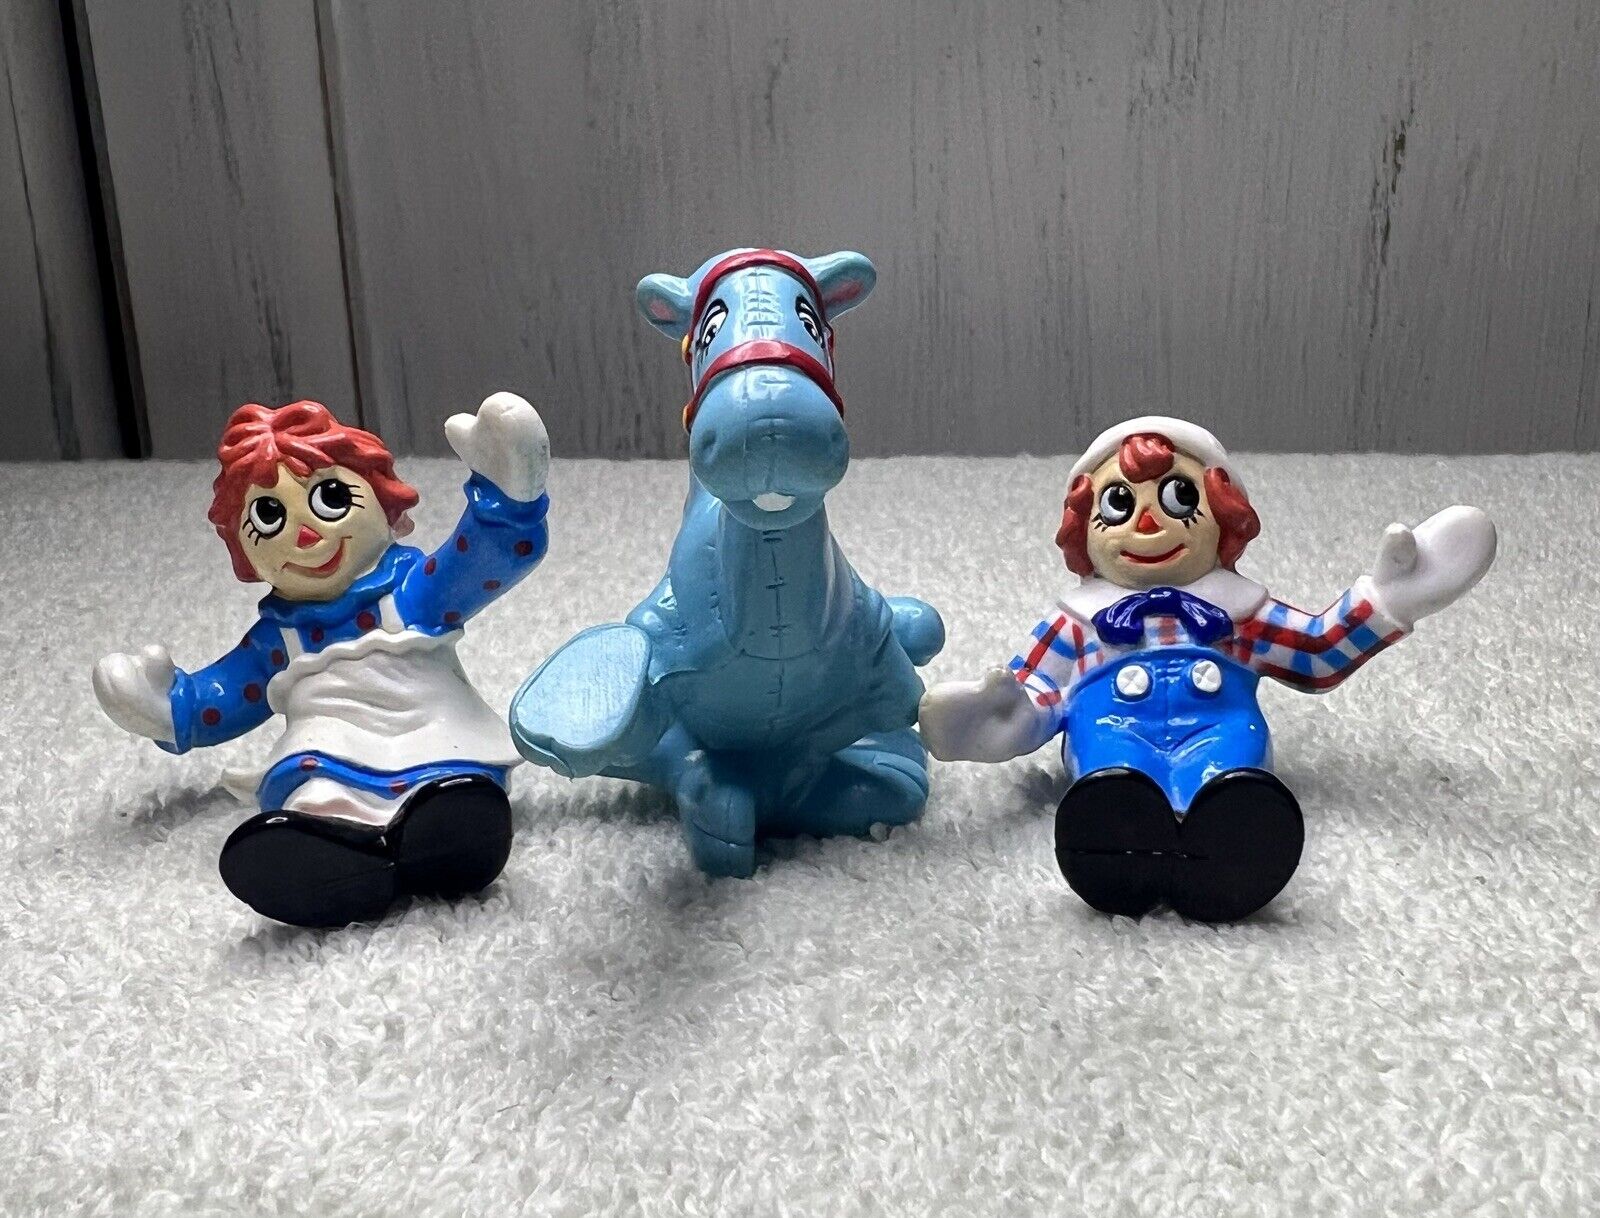 Vintage 1988 MacMillan Raggedy Ann & Andy with Blue Camel Figures PVC